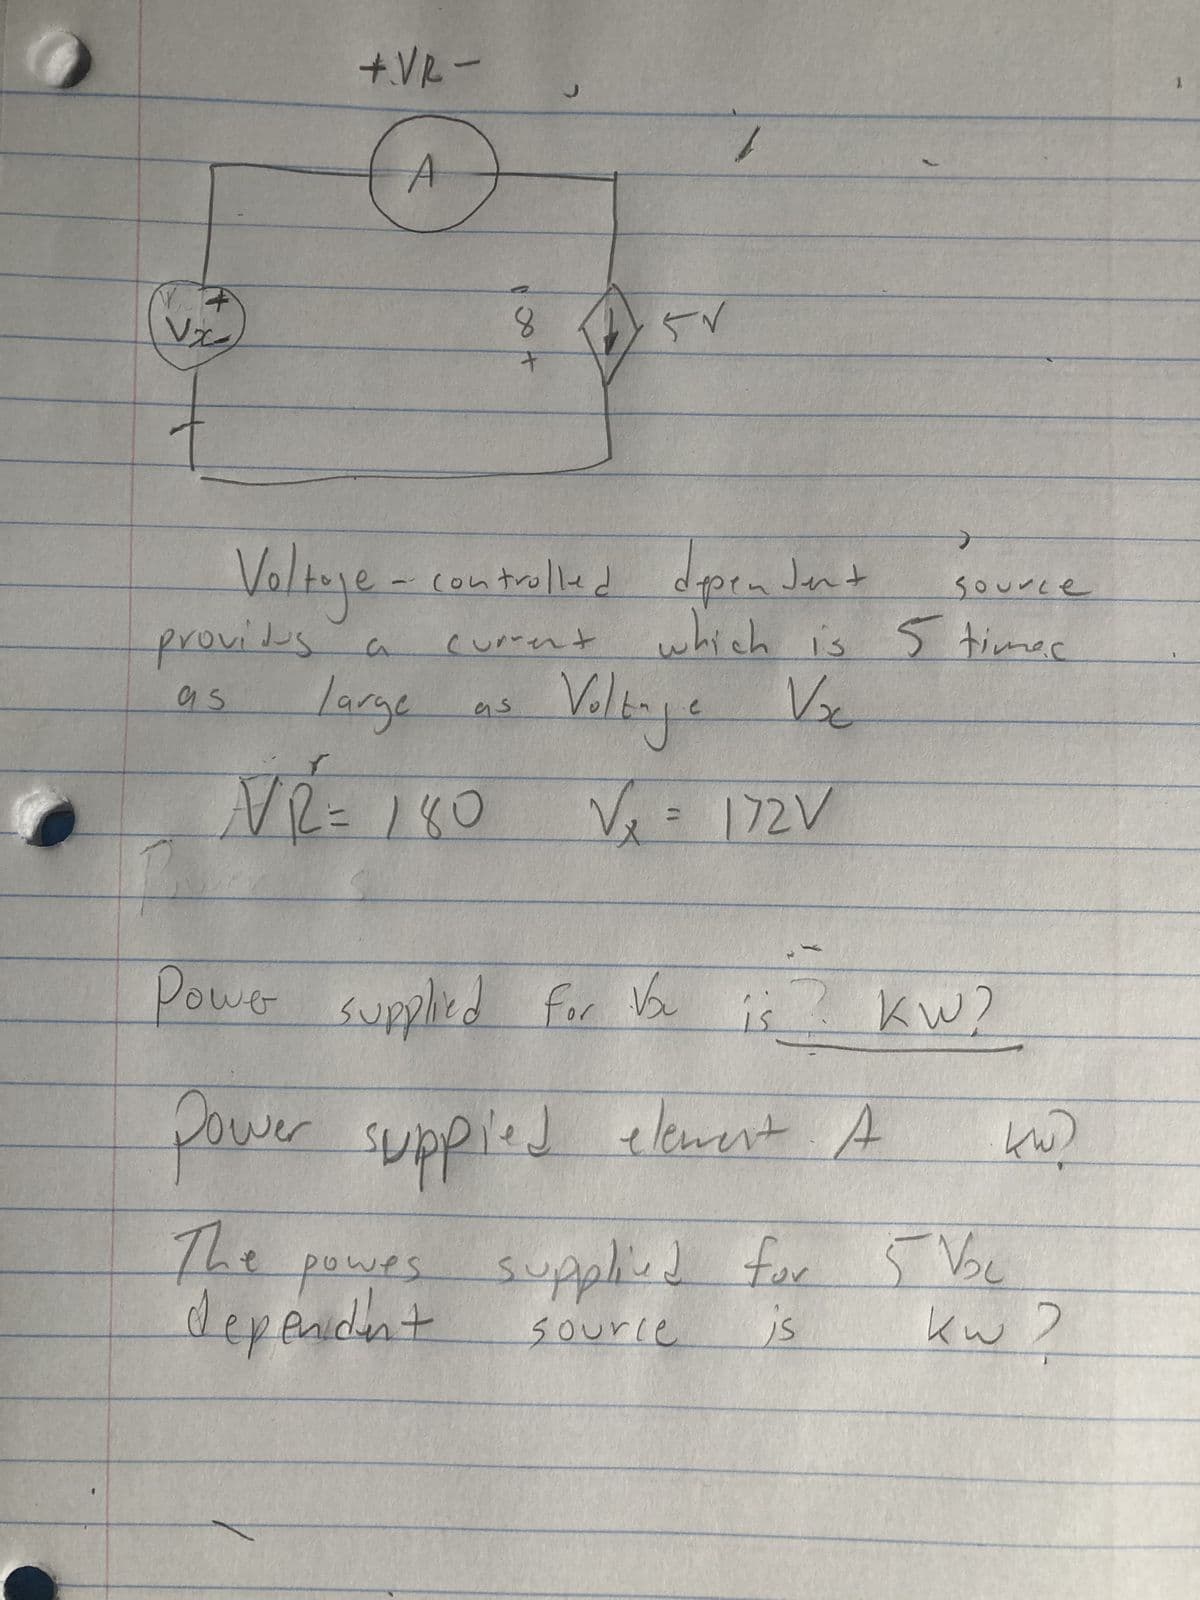 +
Vx
+.VR-
C
providus a
as
Large
√/R = 180
ة (1) عبر
as
8
+
Voltage - controlled dependent
current
1
which is
Voc
C
Volt-ja
√₁₂ = 172V
V₂
Power supplied for Vou
15
Source
5 times
S/
KW?
power suppied element A
The
owes
dependent supplied for 5 Voc
Source
kw?
دینہ
1